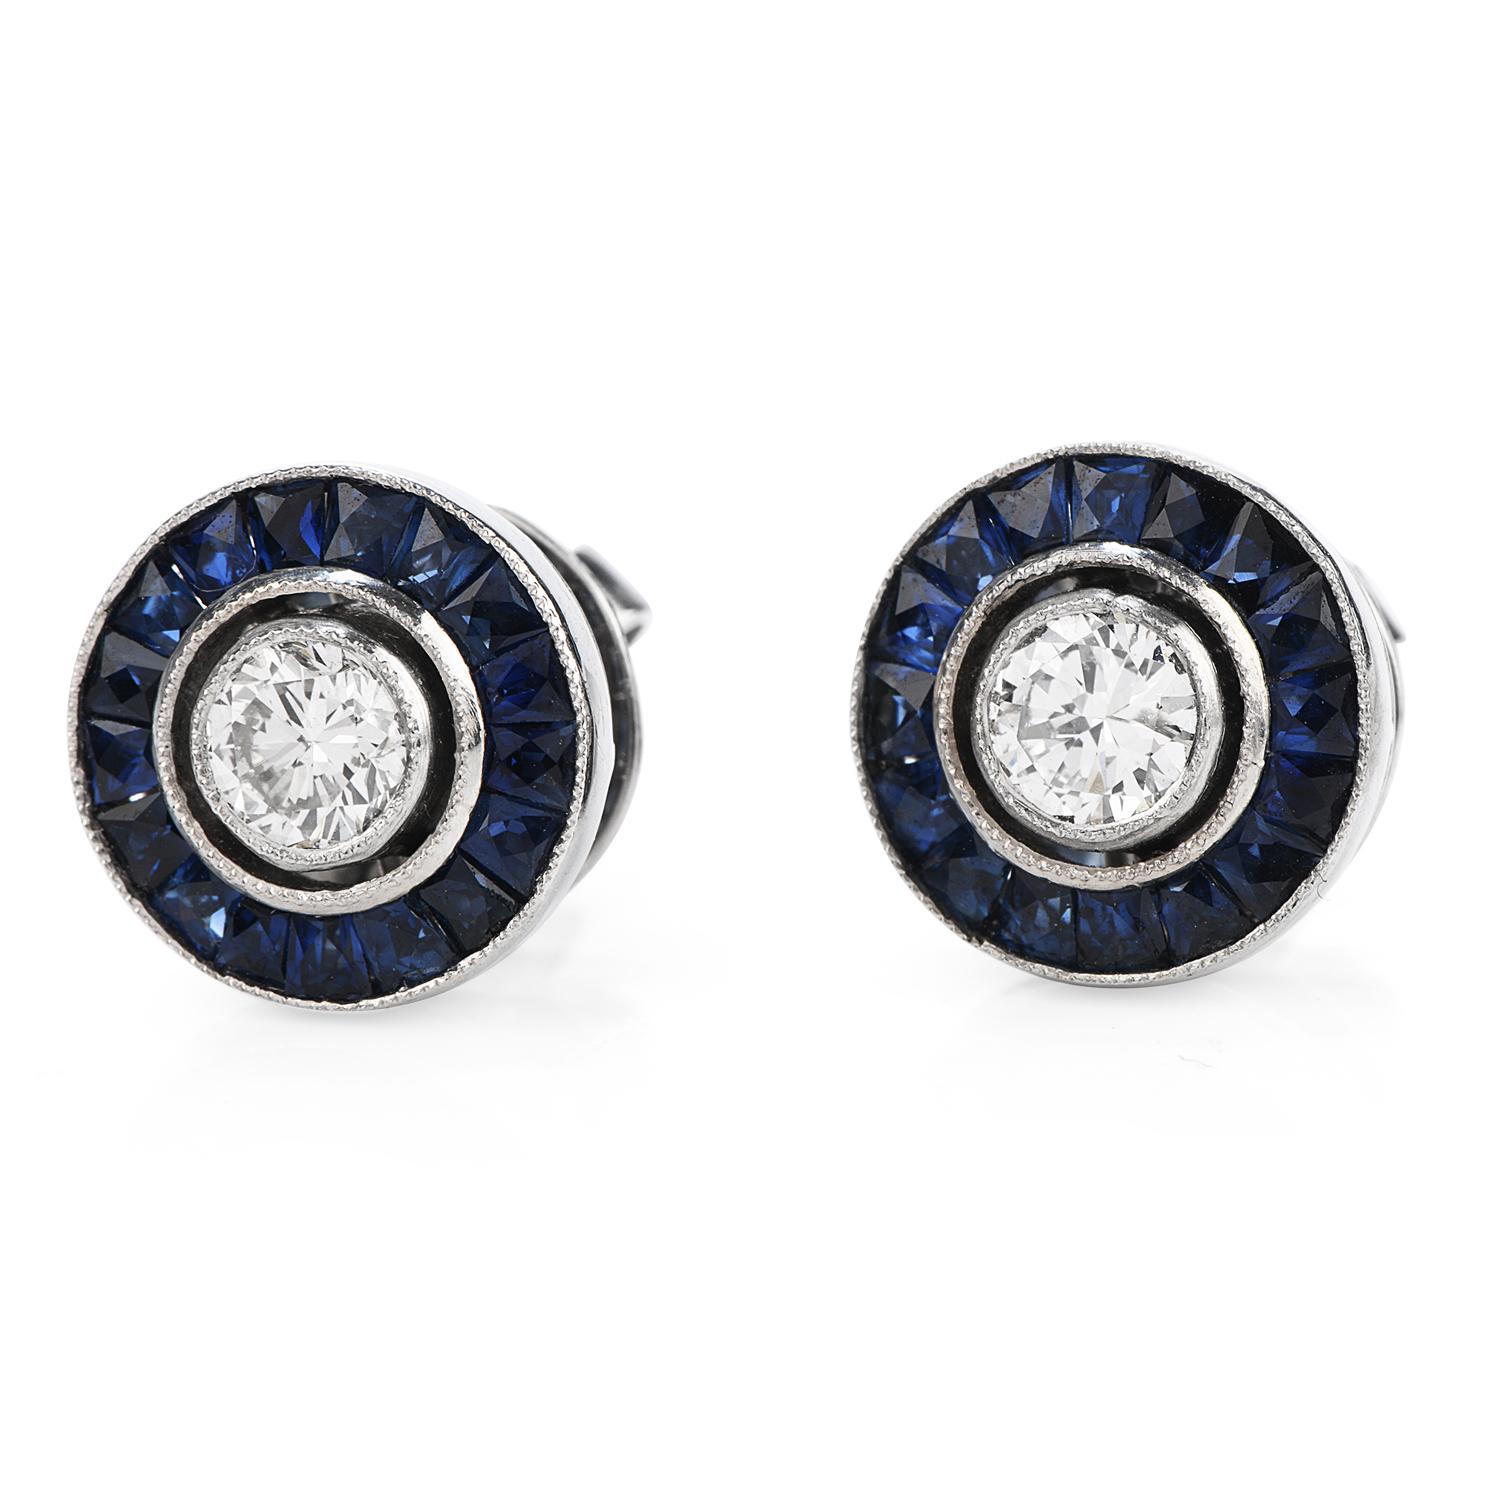 A Gift for others or for yourself!

These Art Deco Style Earrings are crafted in Solid Platinum, 

Displaying in the Center, 2 natural Round Cut Diamonds,  with a total carat weight of 0.40 carats,

G-H color, VS Clarity, surrounded the center